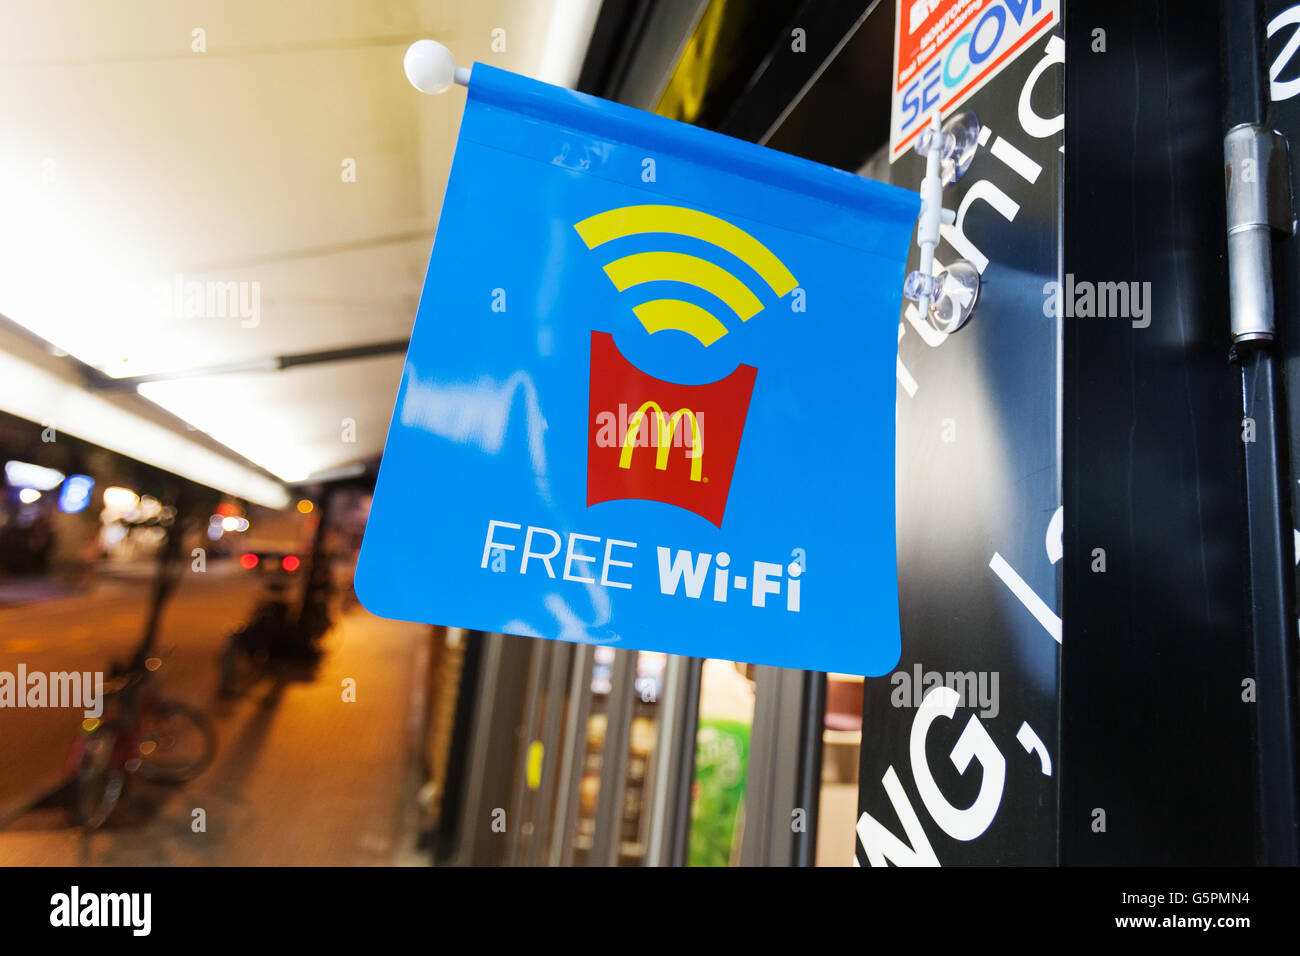 Free wi-fi access promoted outside McDonald's Azabujuban branch on June 23, 2016, Tokyo, Japan. McDonald's Japan launched the service on June 20th and announced that it will provide free wi-fi in some 1,500 branches across Japan by the end of July. © Rodrigo Reyes Marin/AFLO/Alamy Live News Stock Photo